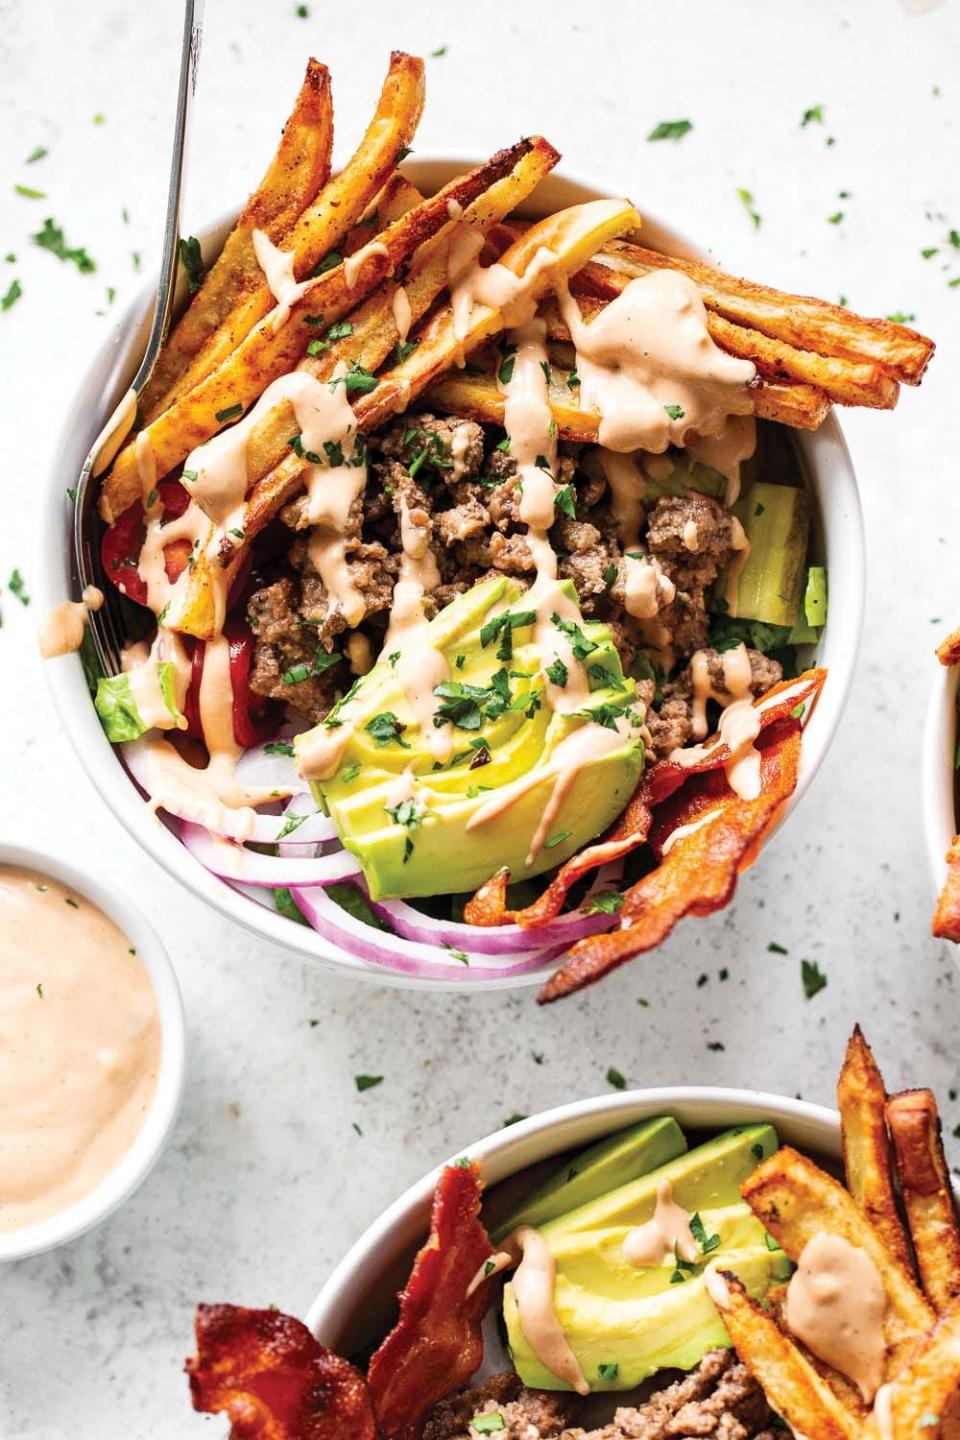 Michele Rosen’s burger bowls with fries